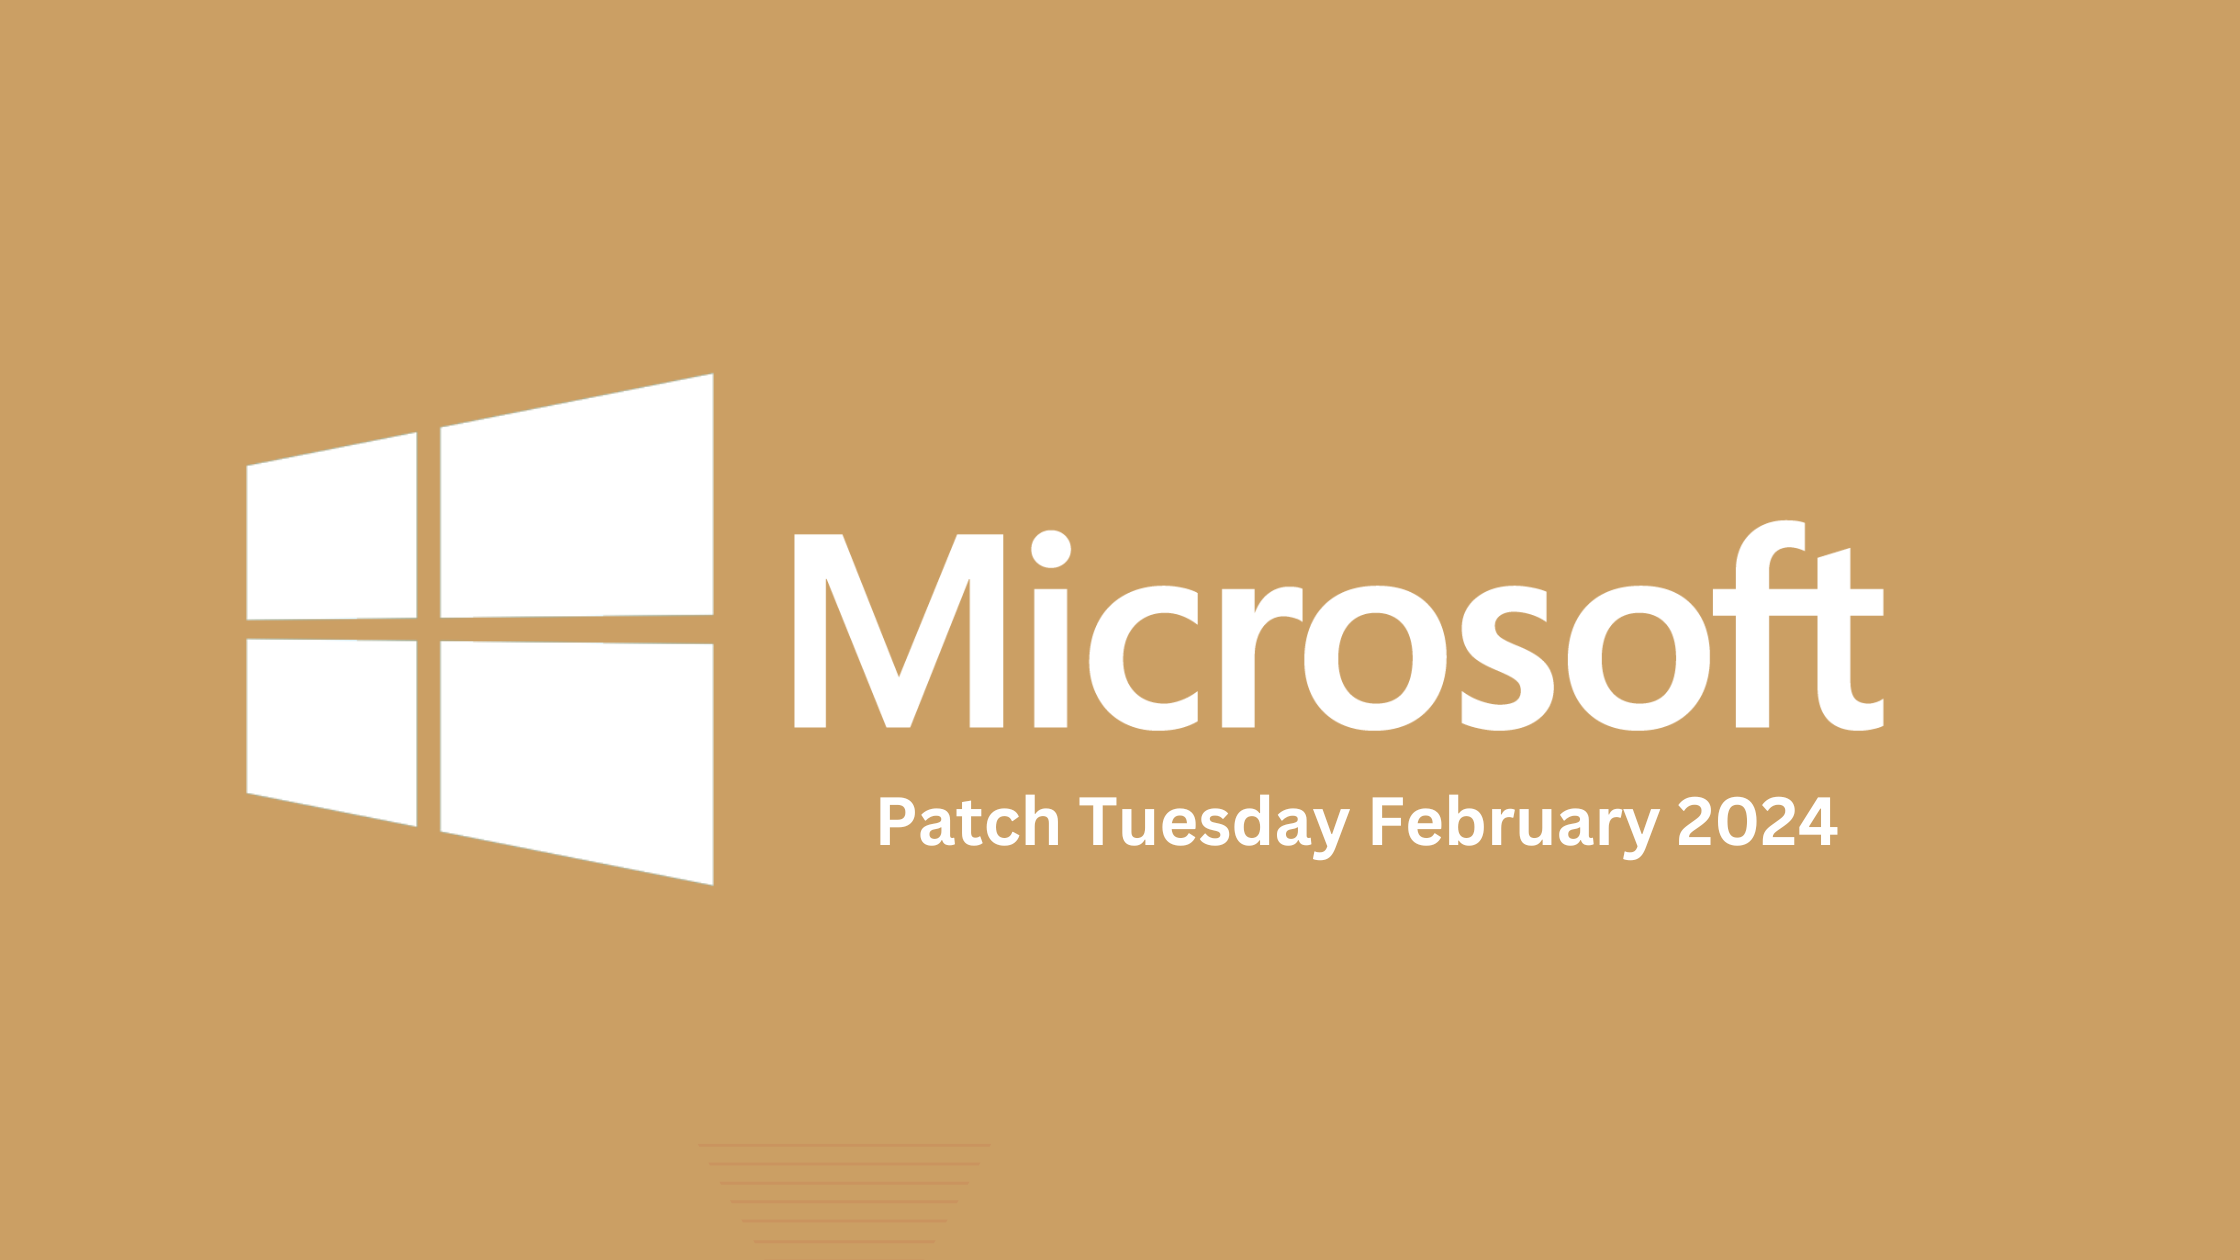 Breaking Down the Latest February 2024 Patch Tuesday Report